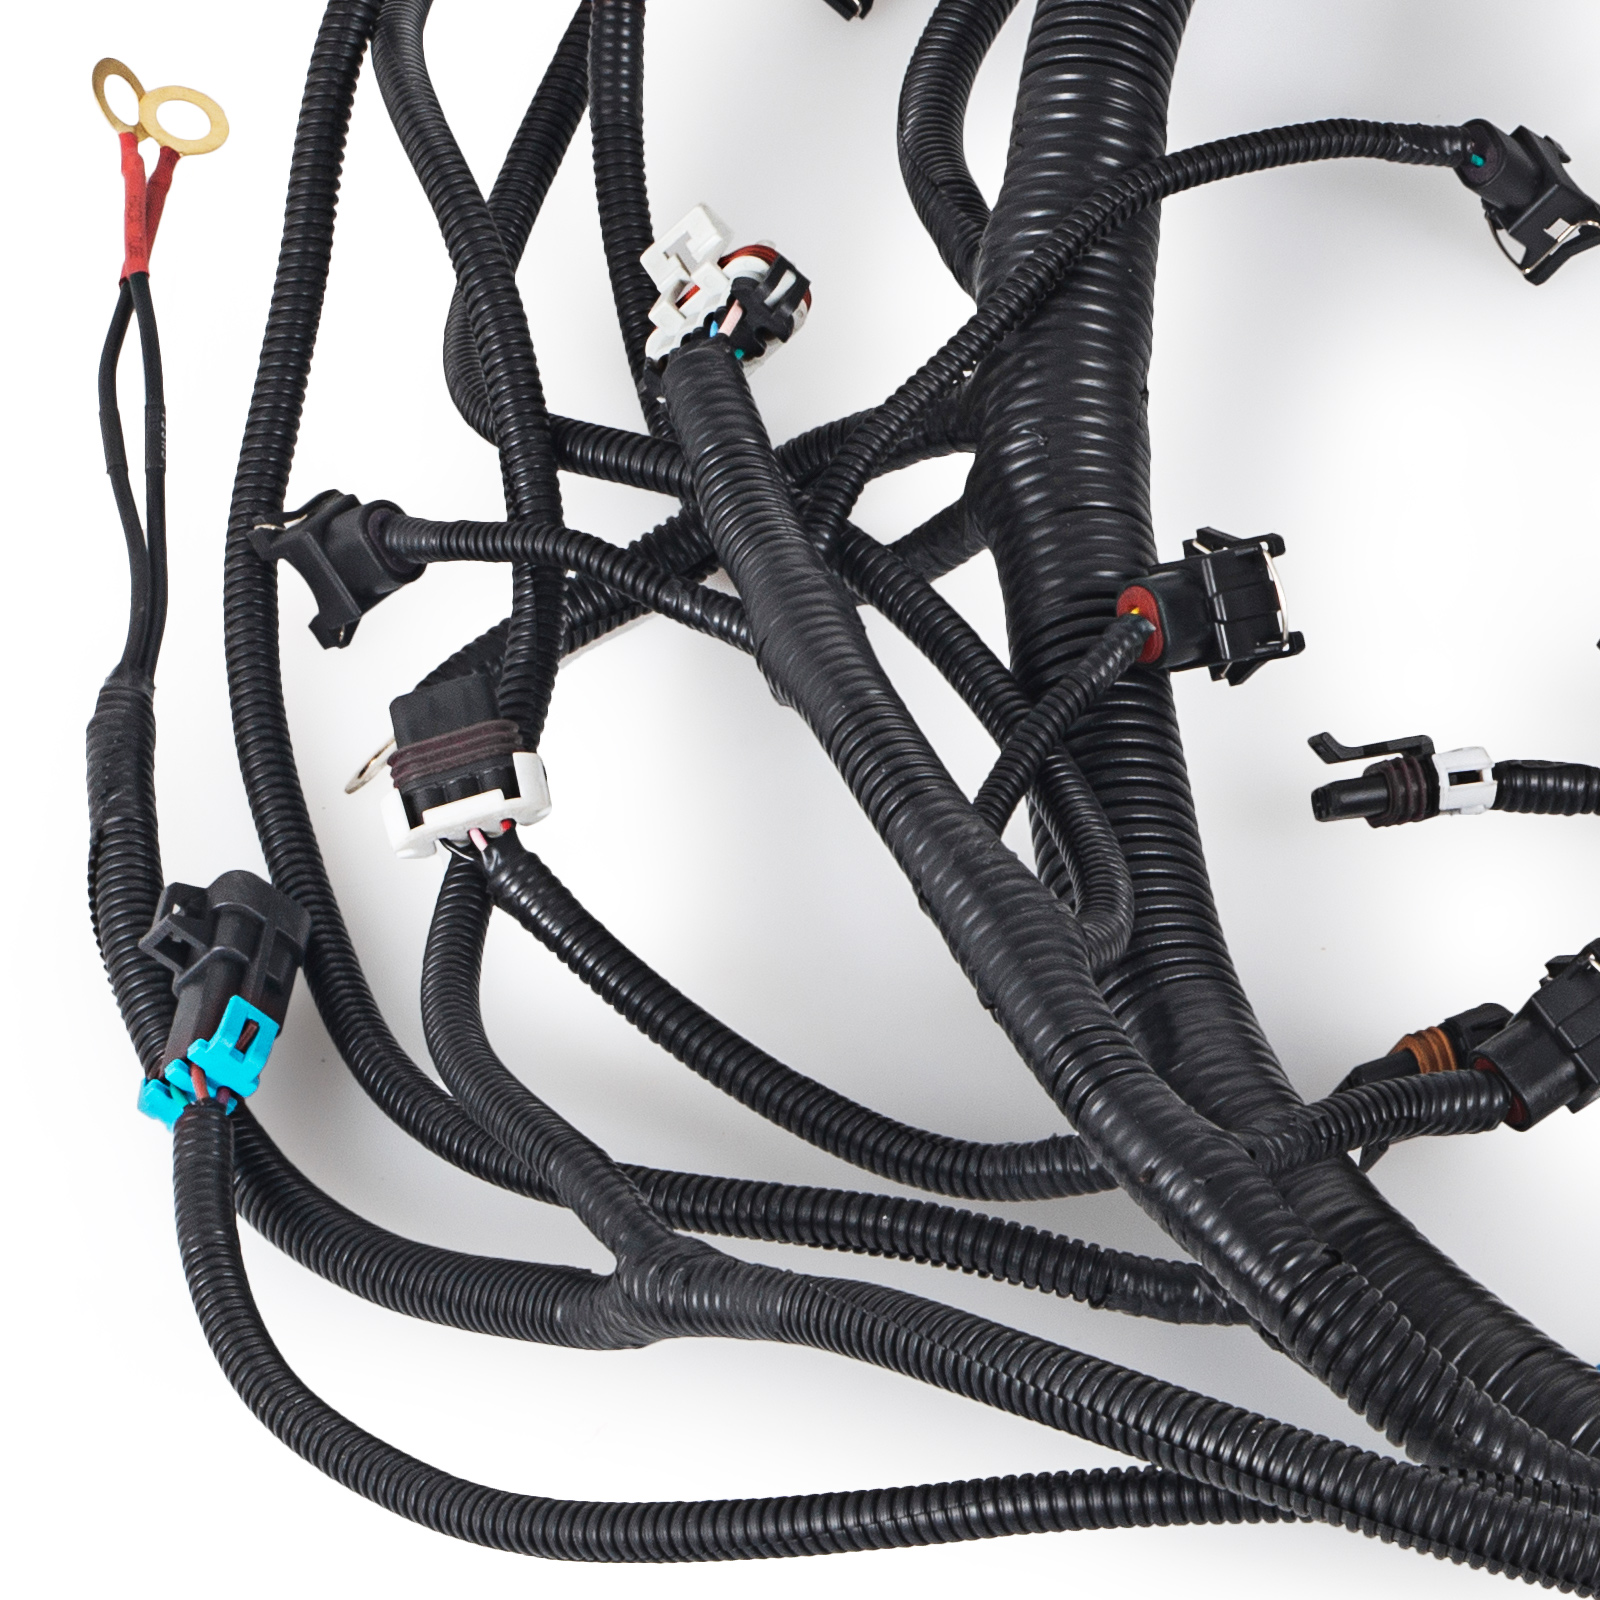 1997-2006 DBC LS1 STANDALONE WIRING HARNESS T56 or Non-Electric Tran 4.